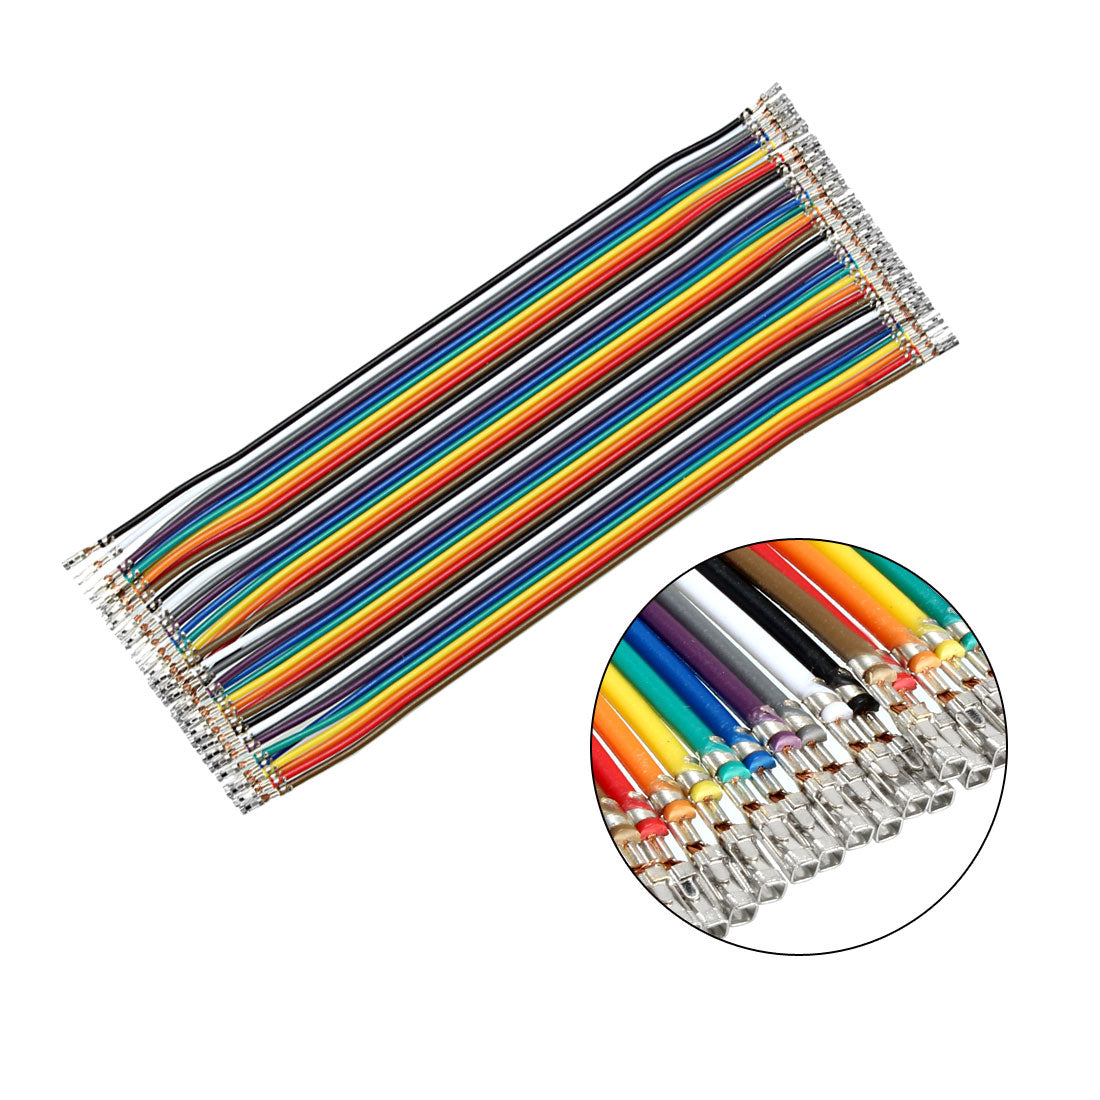 uxcell Uxcell Female to Female 40P Jumper Wire 2.54mm Pitch Ribbon Cable Breadboard DIY 15cm Long